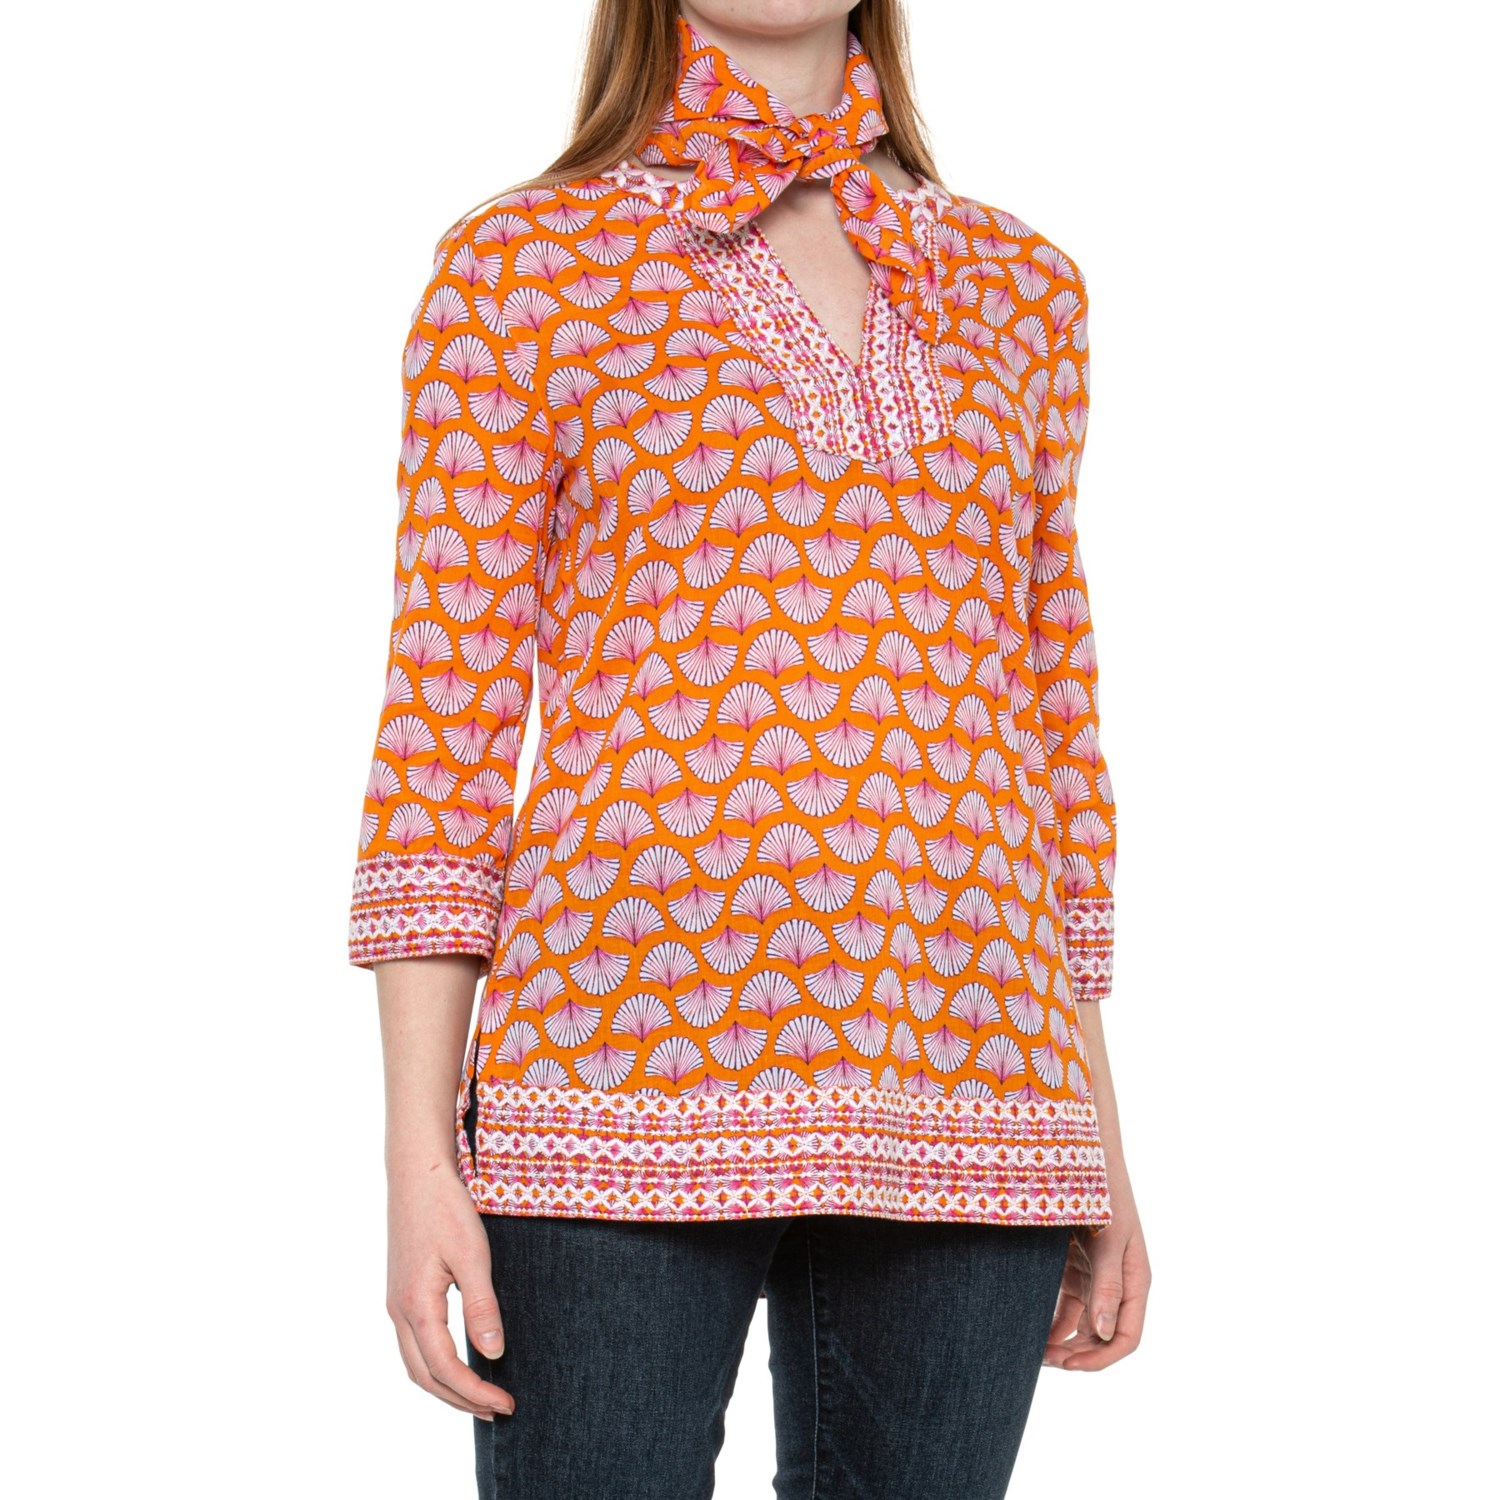 Sigrid Olsen Embroidered Tunic Shirt with Matching Scarf - 3/4 Sleeve ...